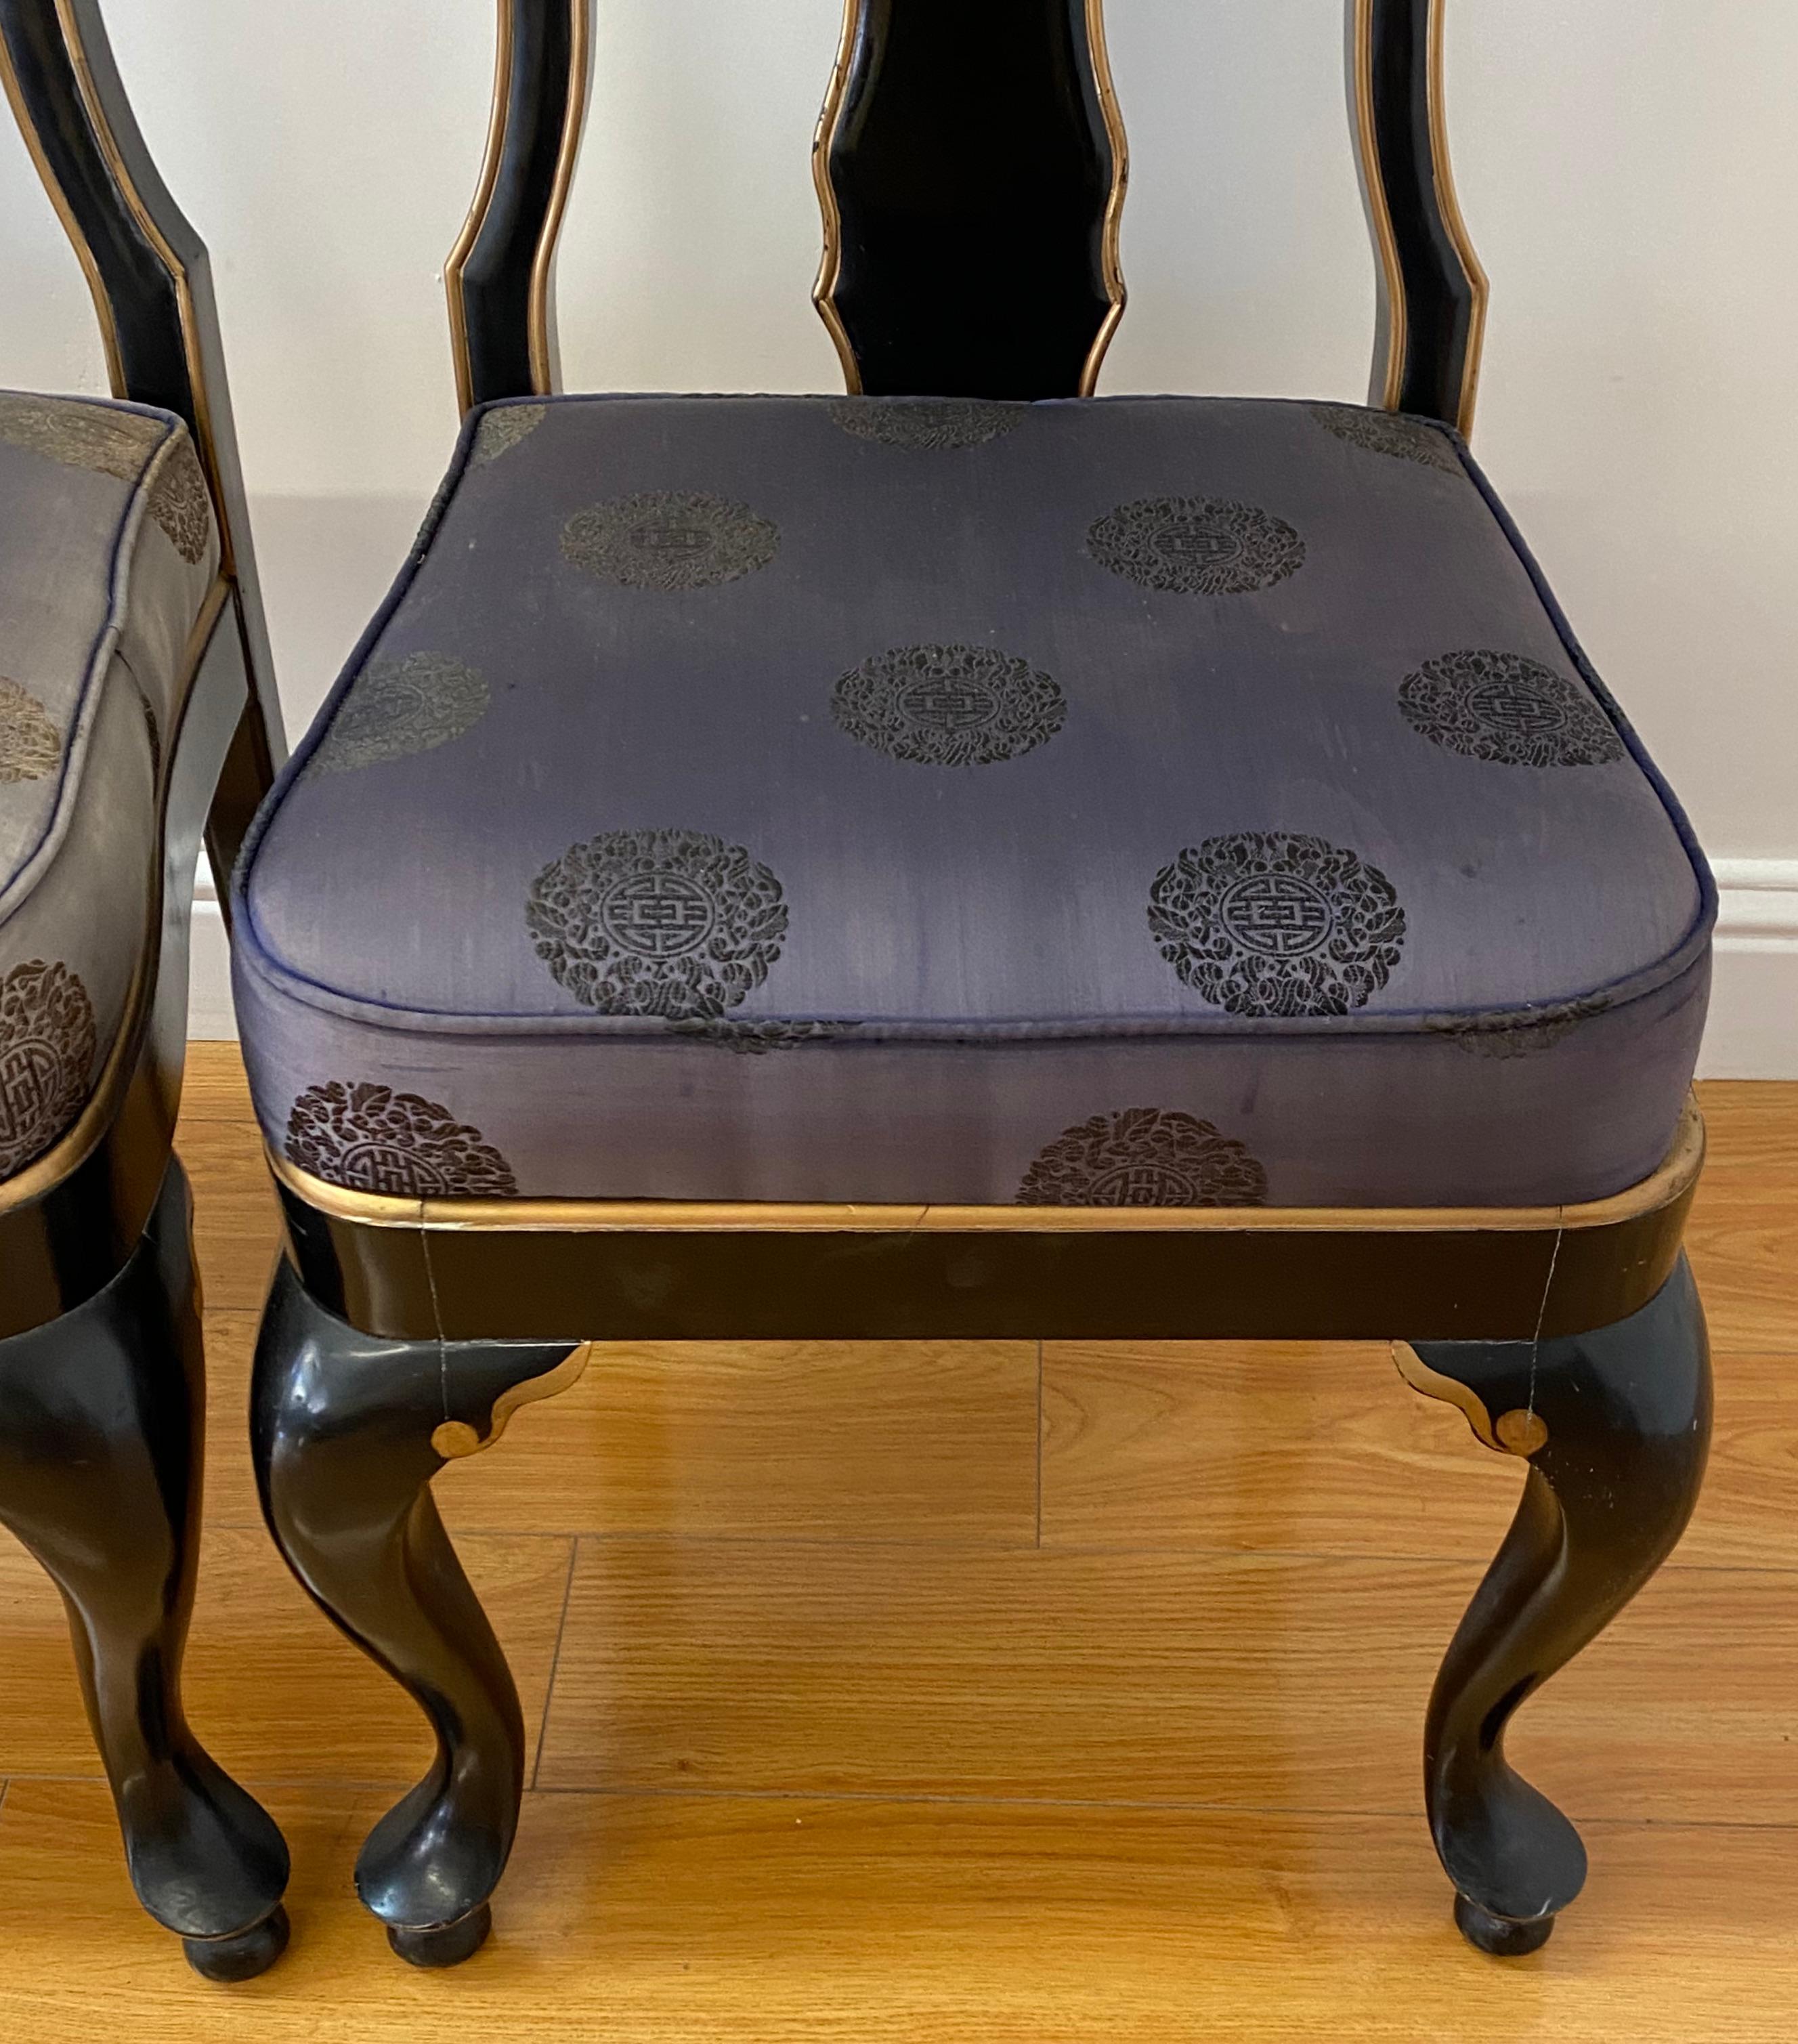 20th Century Pair of Asain Black Lacquer and Mother of Pearl Inlay Side Chairs 20th C. For Sale